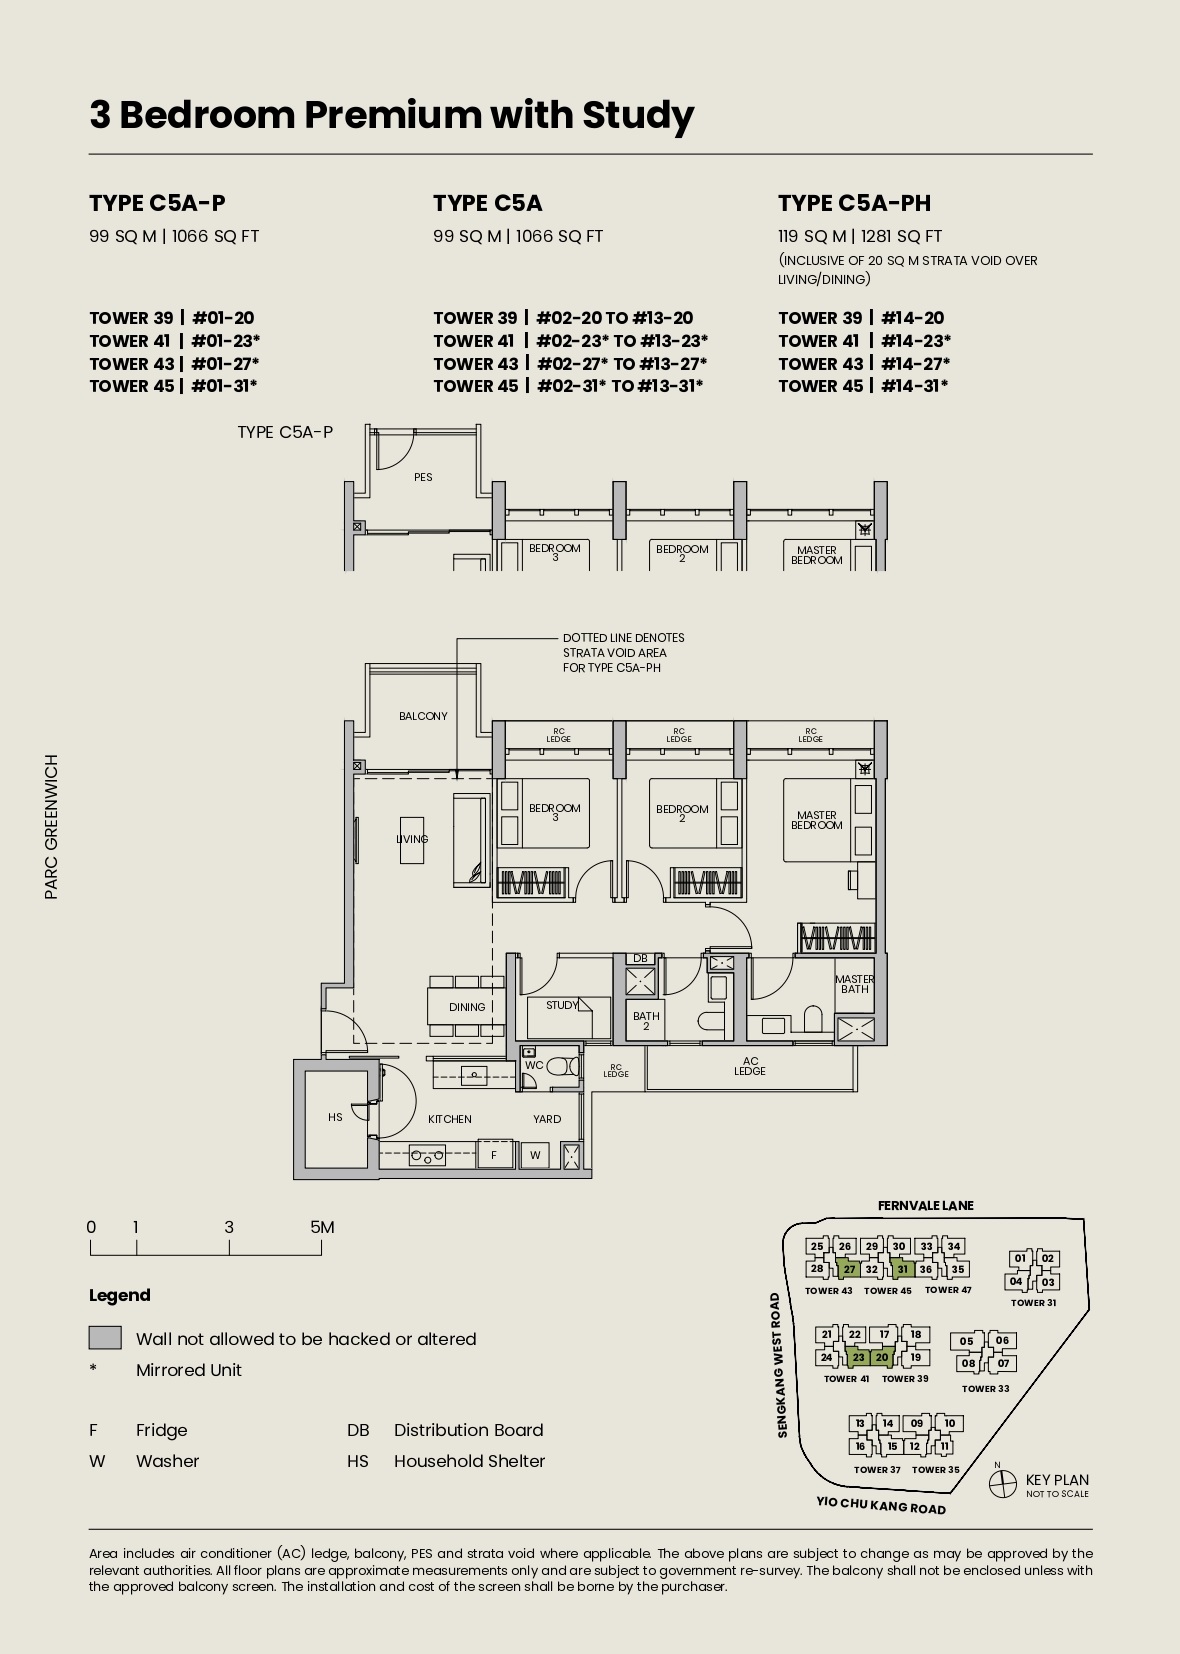 Parc Greenwich 3 Bedroom Premium With Study Type C5A-P, Type C5A, Type C5A-PH Floor Plans